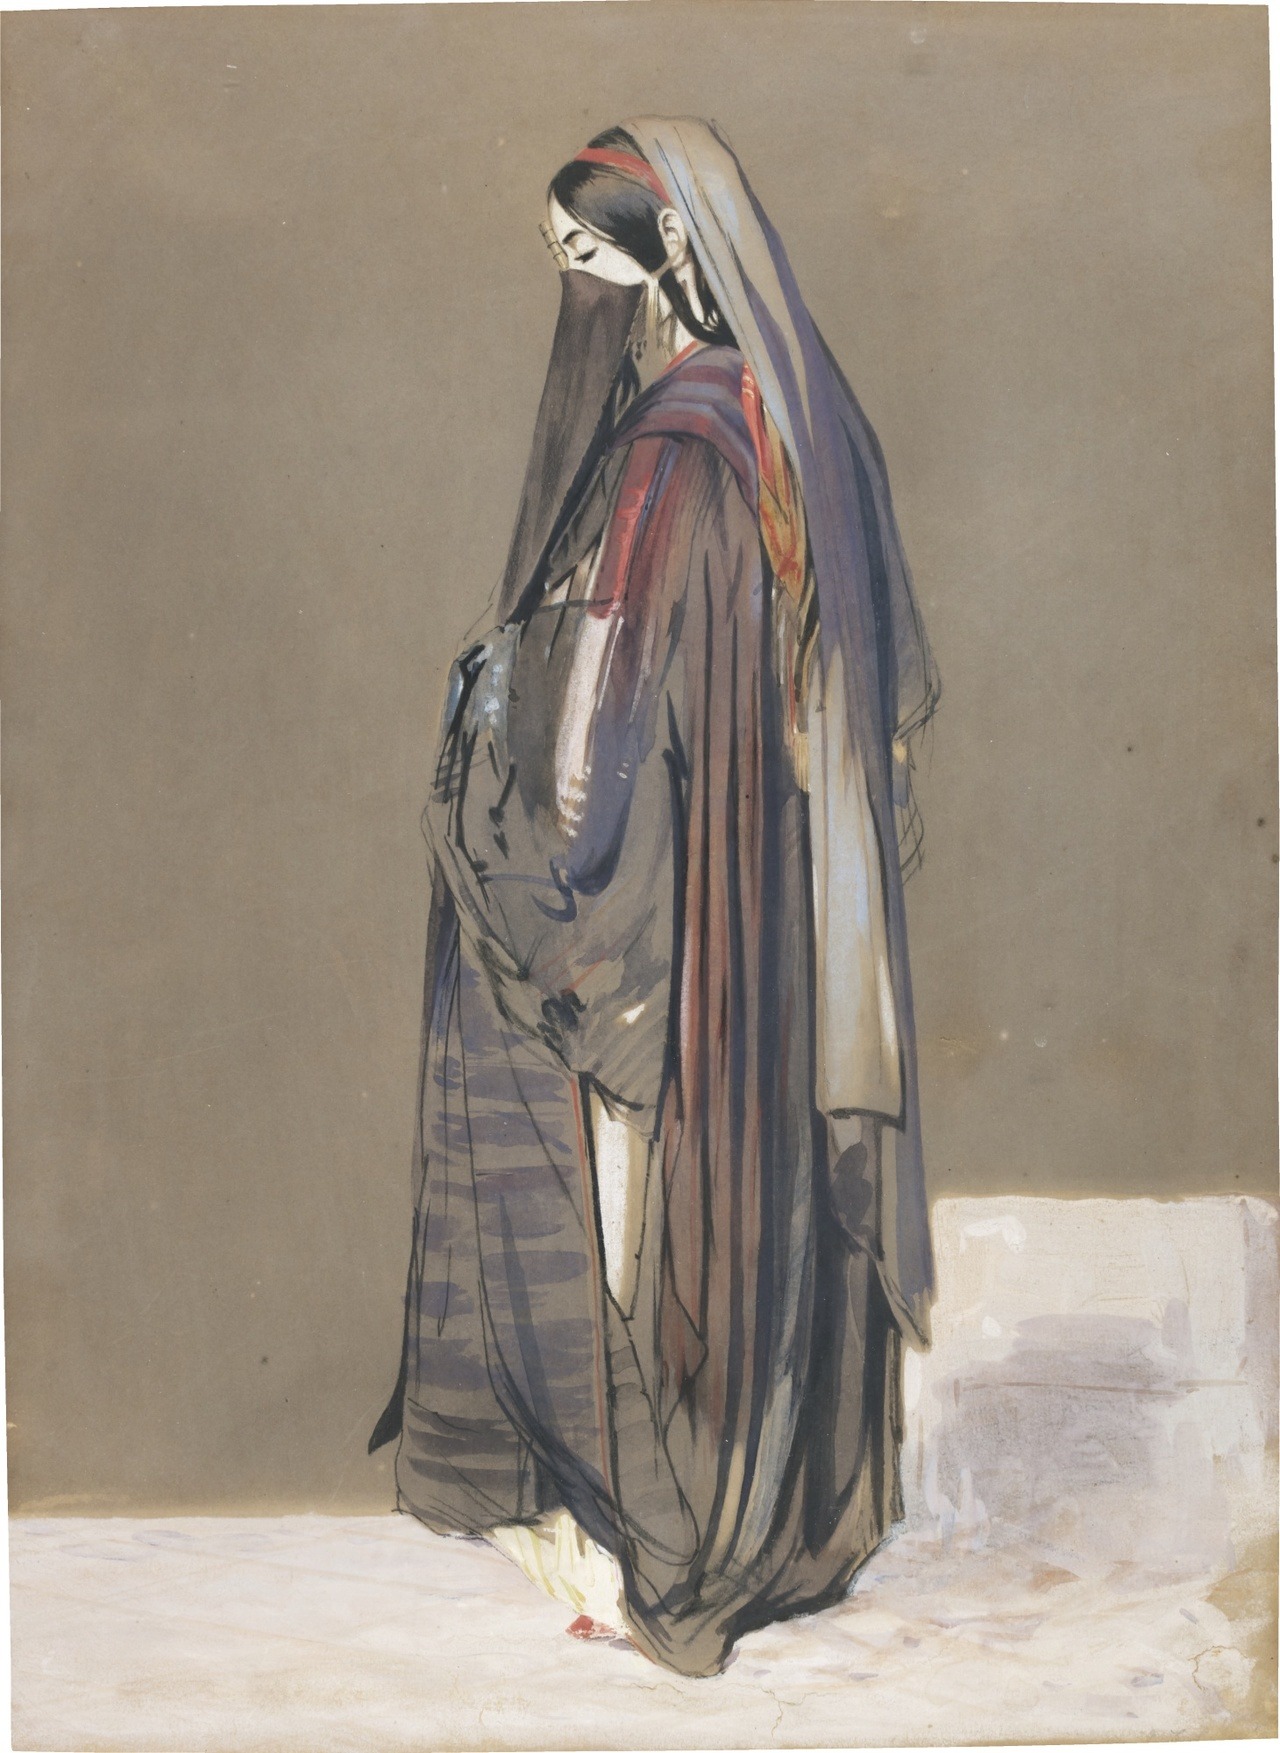 John Frederick Lewis (1804-1876), â€˜A Veiled Egyptian Girl, Cairoâ€™, 1840s or 1850s, bodycolour on paper, British, for sale est. 6,000-8,000 GBP in Sothebyâ€™s Old Master & British Works on paper, July 2019